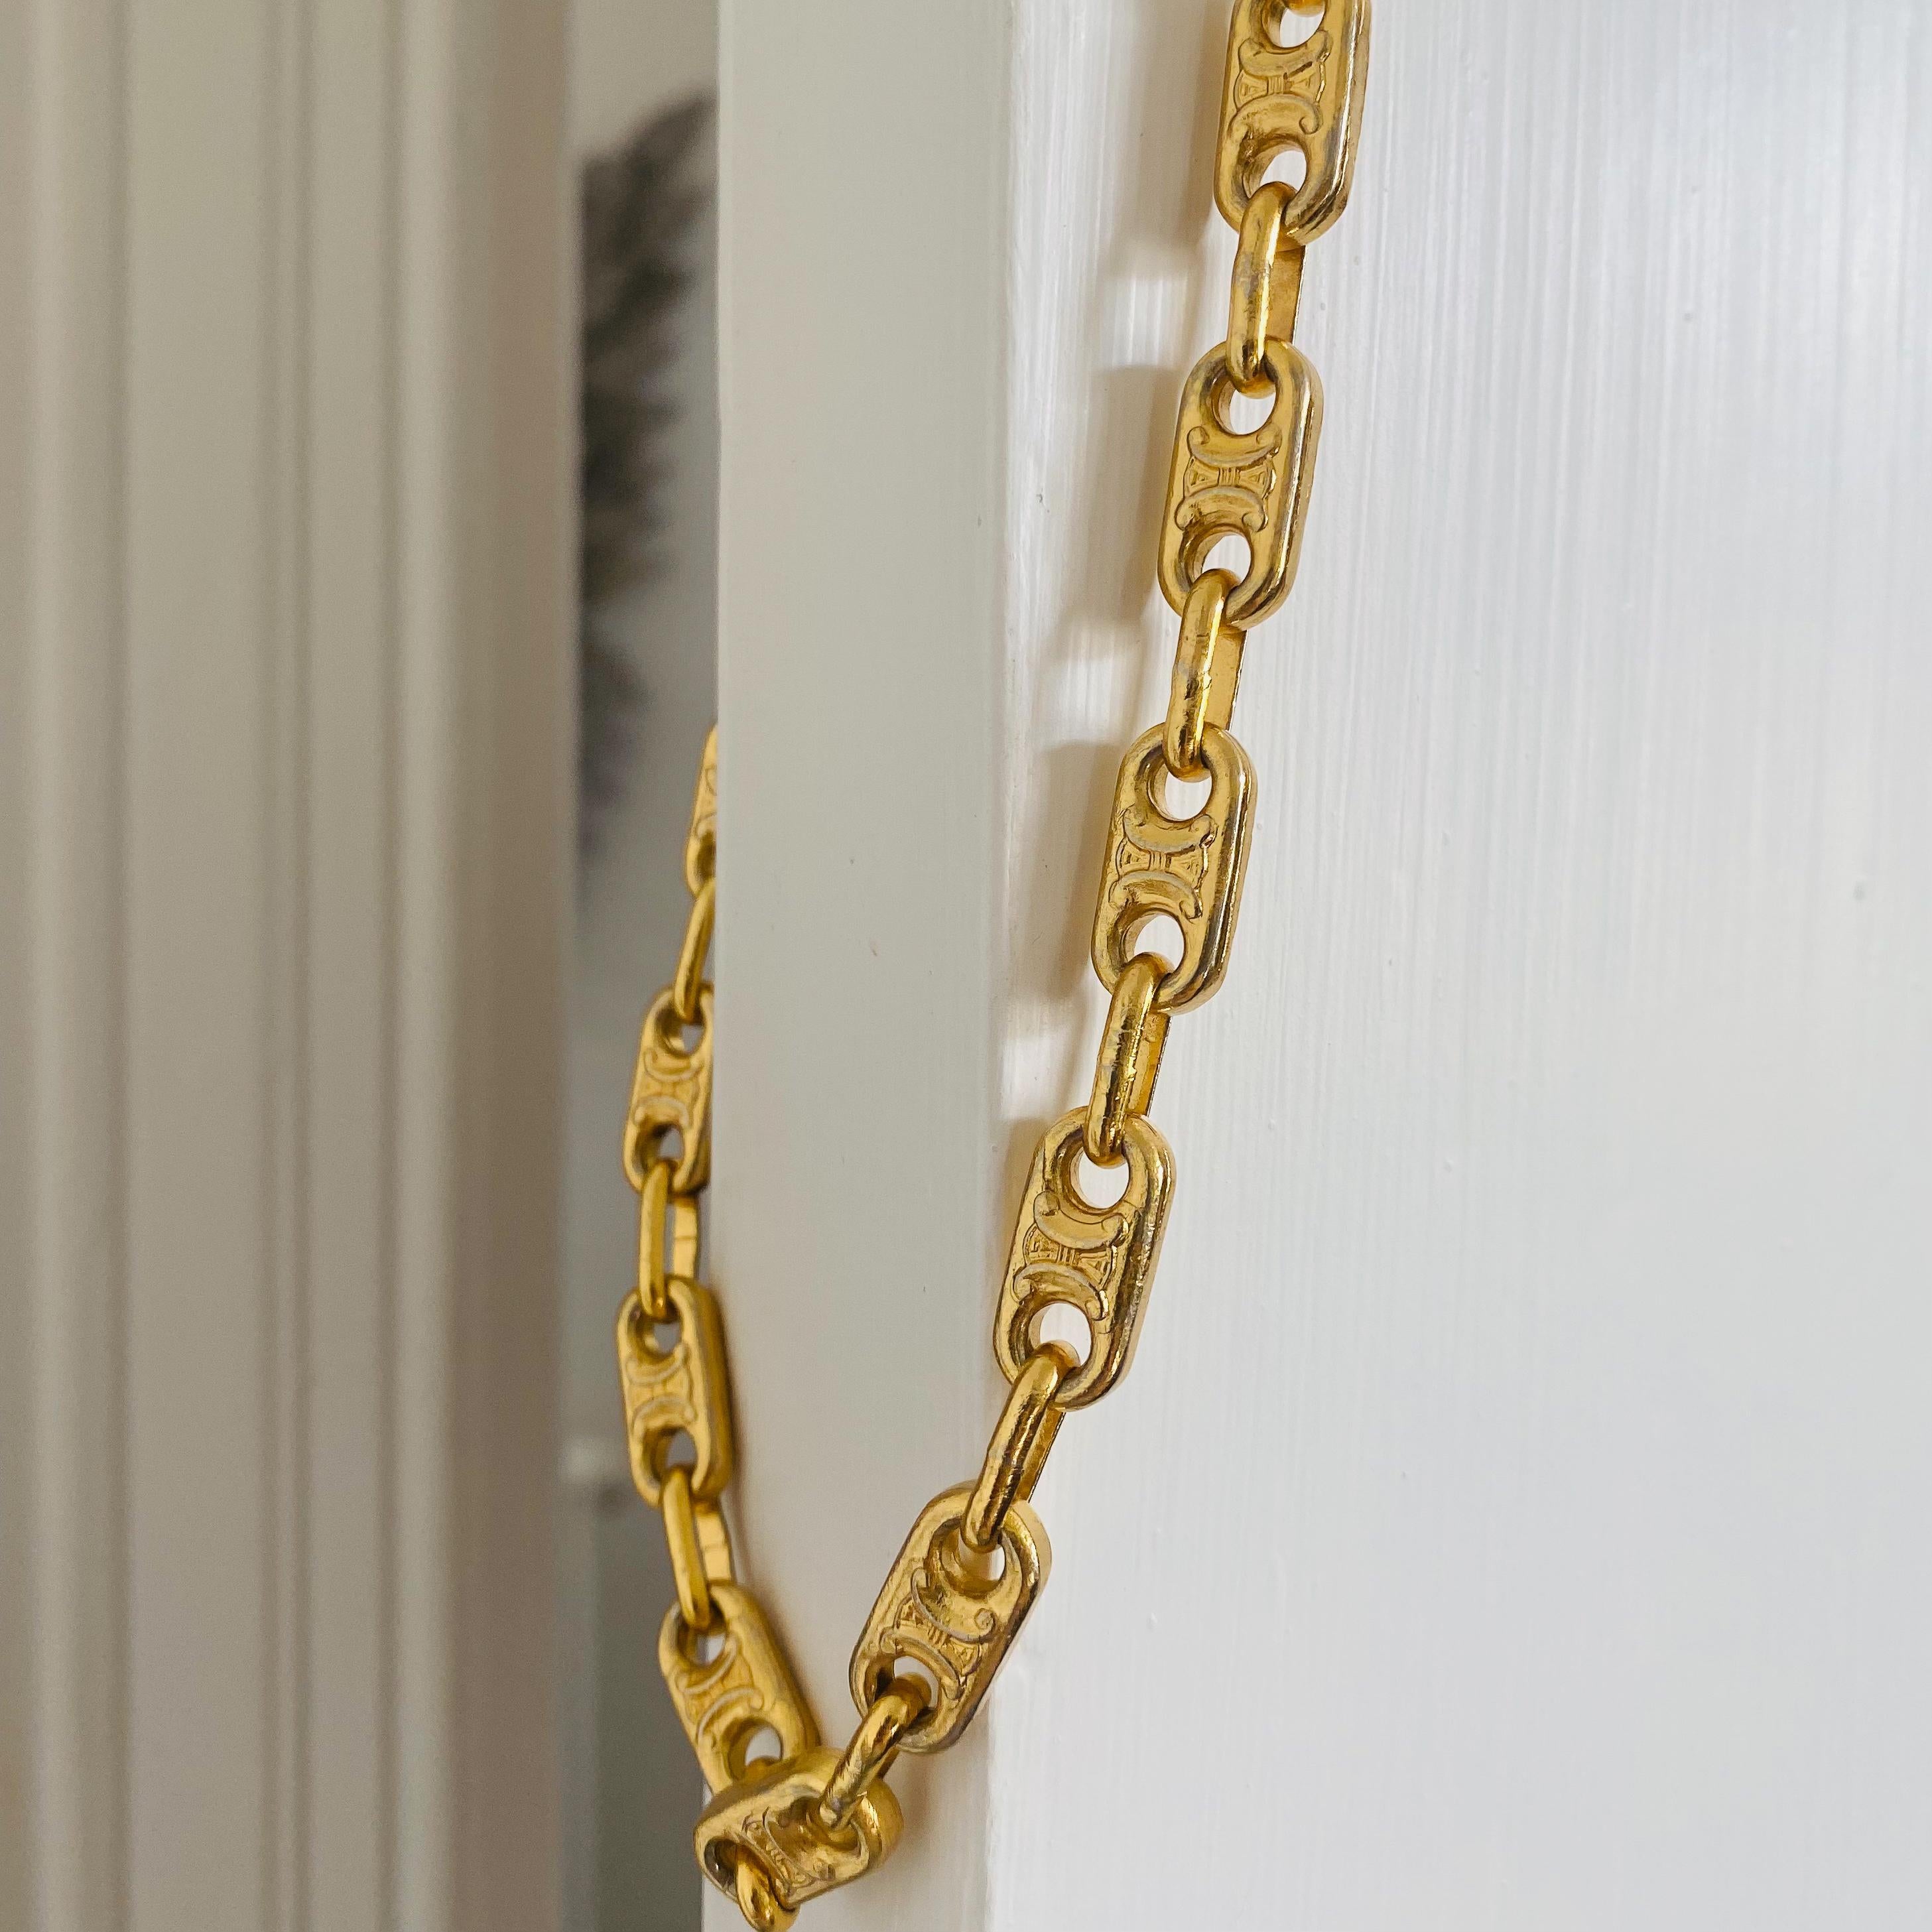 Celine Vintage 1970s Extra Long Necklace

An amazing chunky chain from the legendary house of Celine. Made in Italy in the 1970s from gold plated metal this extra long chain is constructed from the iconic macadam 'Triomphe' symbol Links. A super